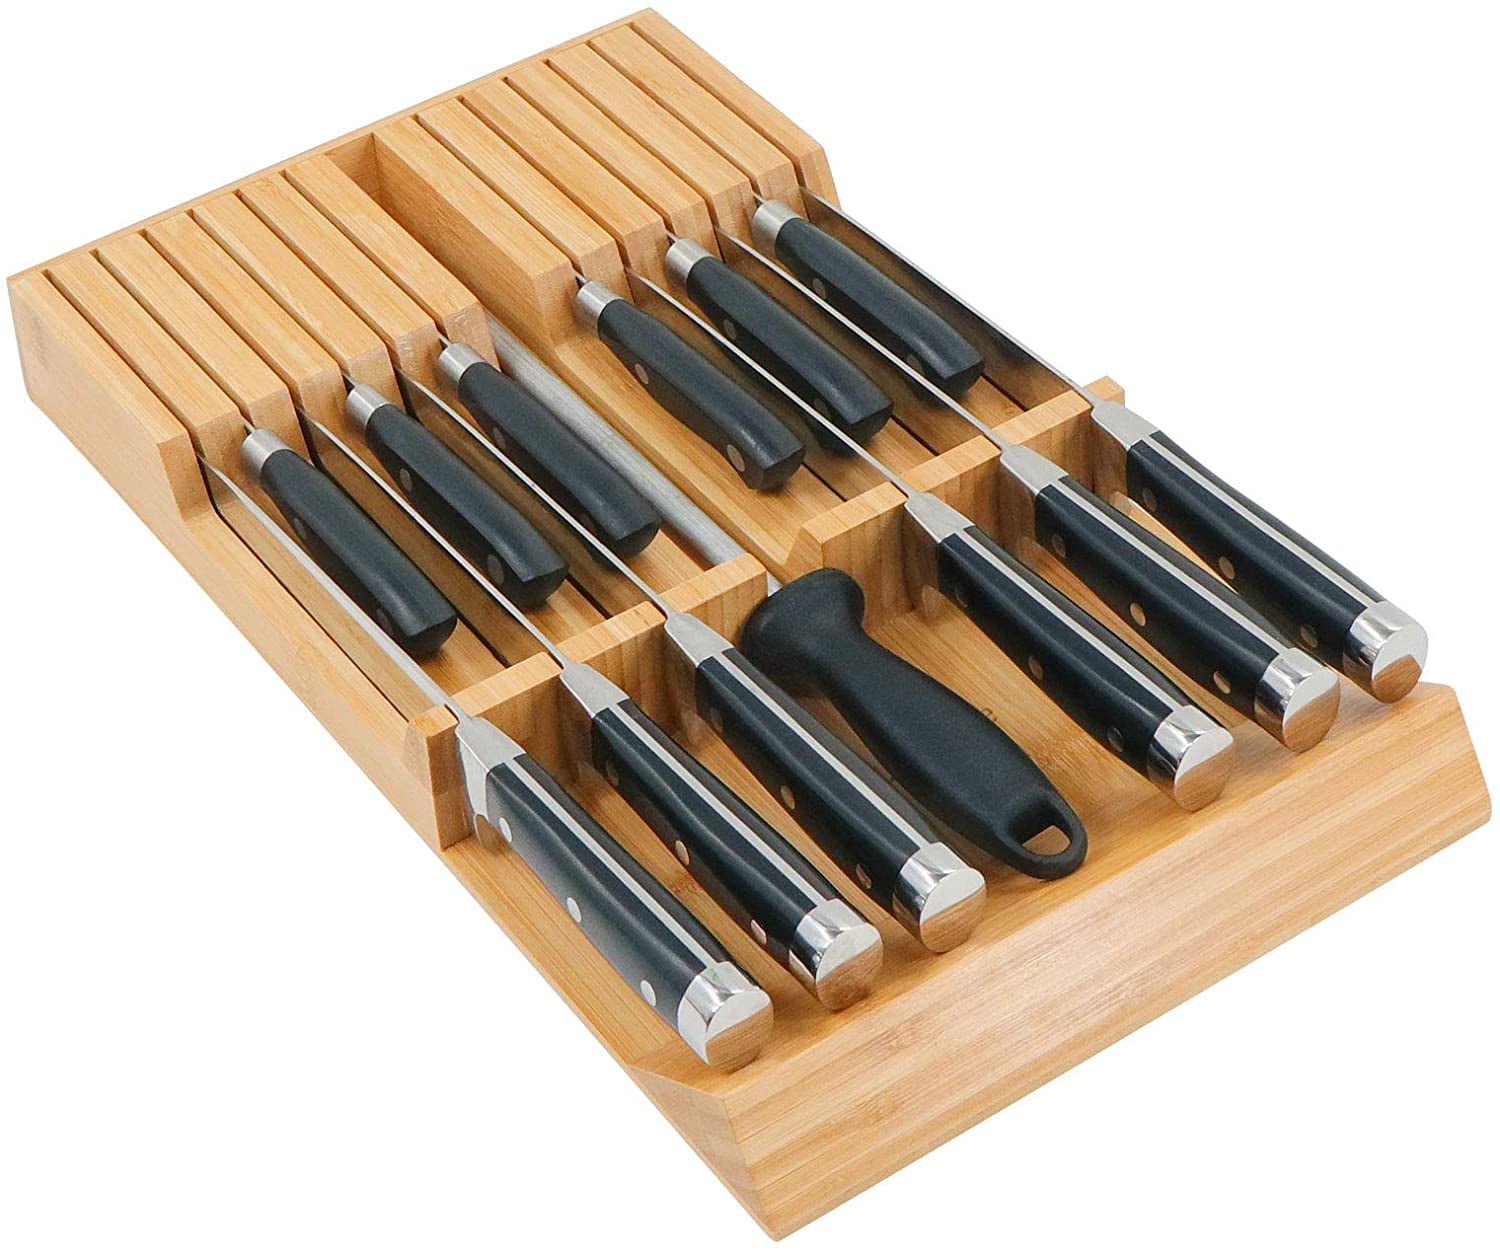 TrueBlueBamboo Kid Safe In-Drawer Bamboo Sharp Knives Holder & Organizer. (Knives Not Included). Multi Purpose Lock Box. Only 5.5 Inches Wide. Holds Up TP 25